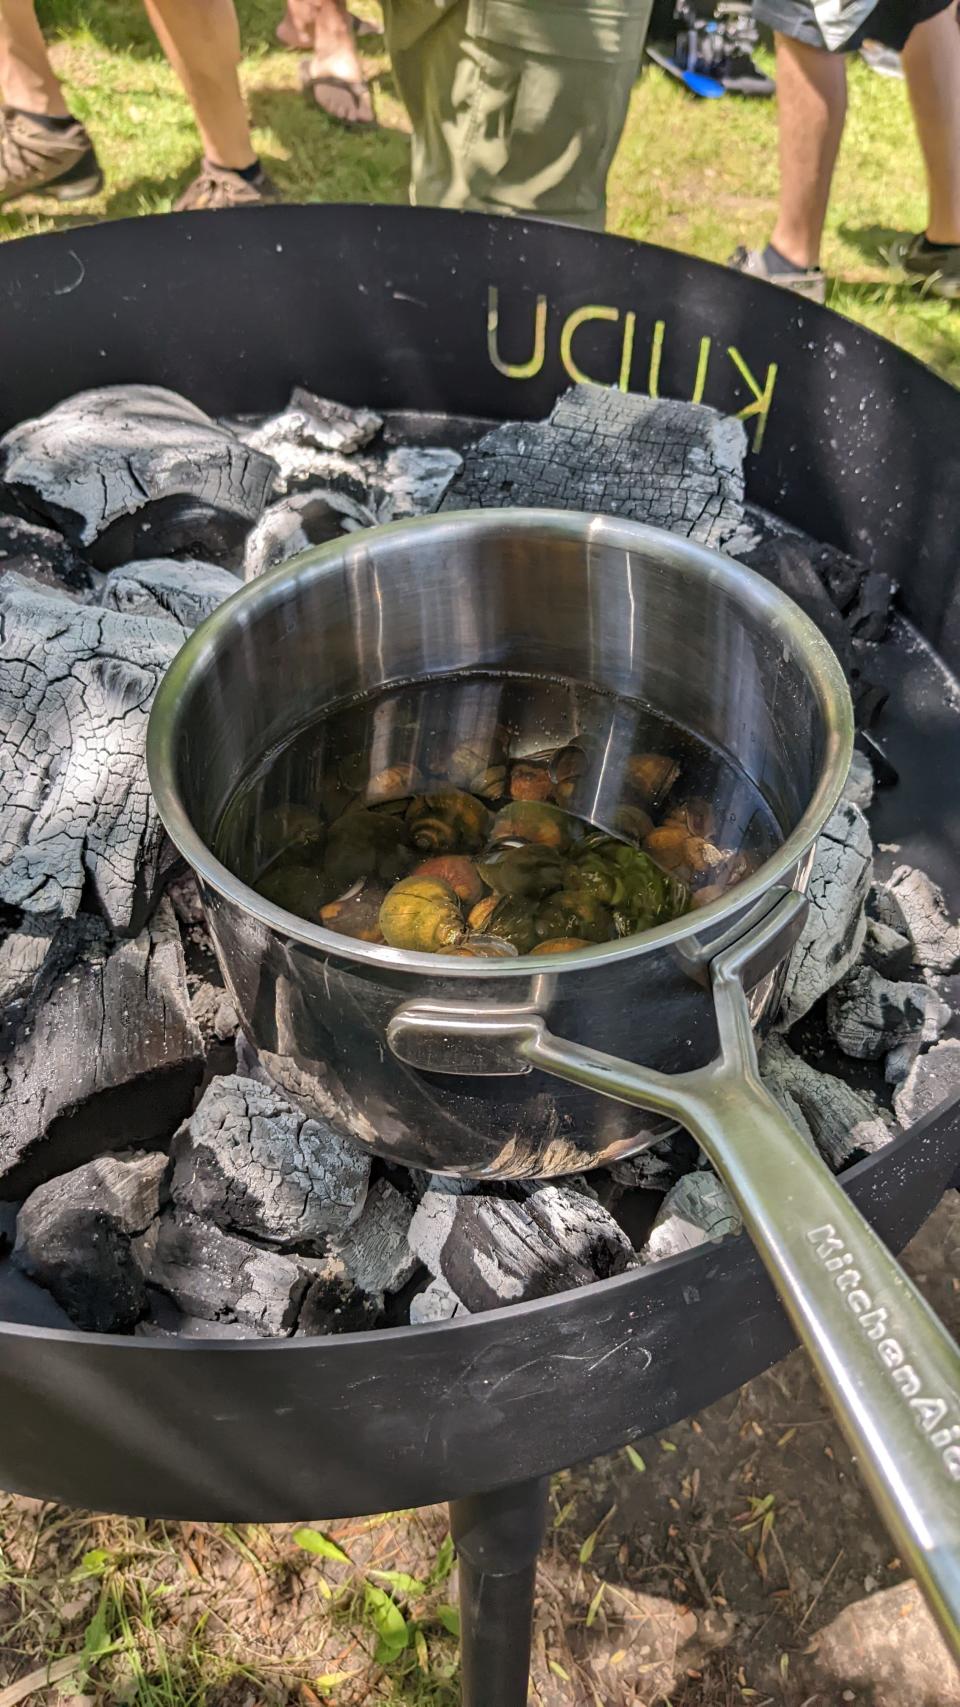 Invasive mystery snails cook in a pot last summer at Clear Lake, made by chef Yia Vang.